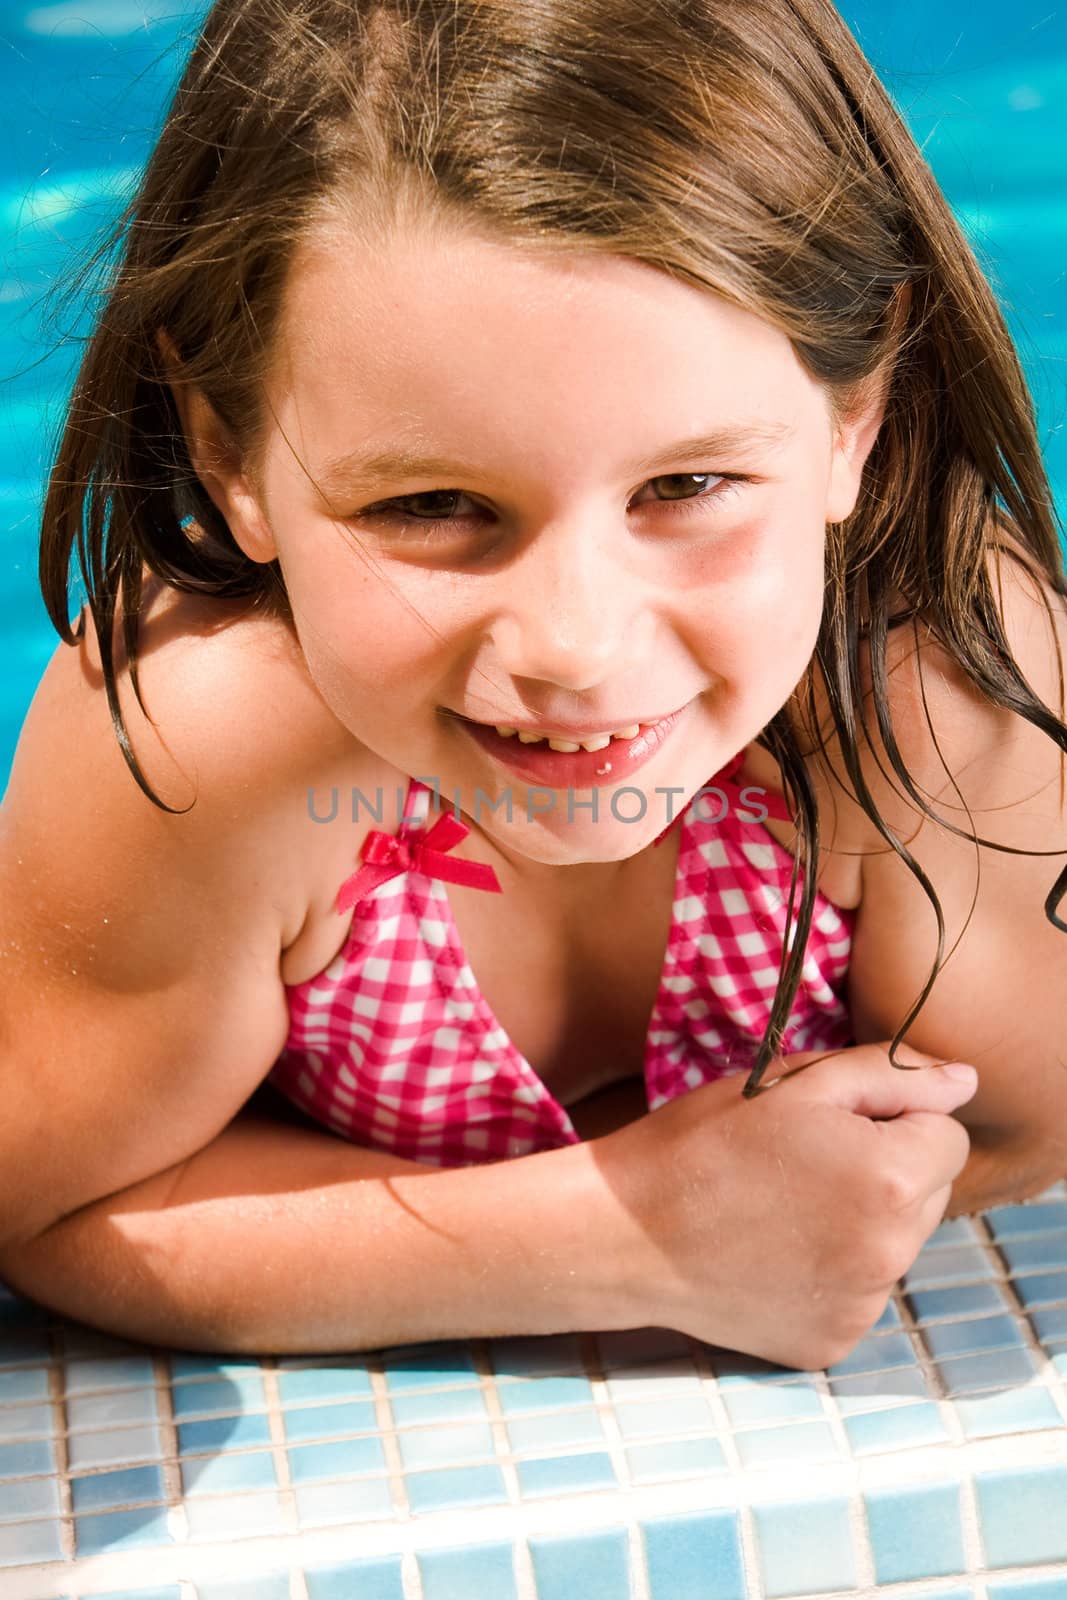 Young child enjoying the sun in and around the swimming pool